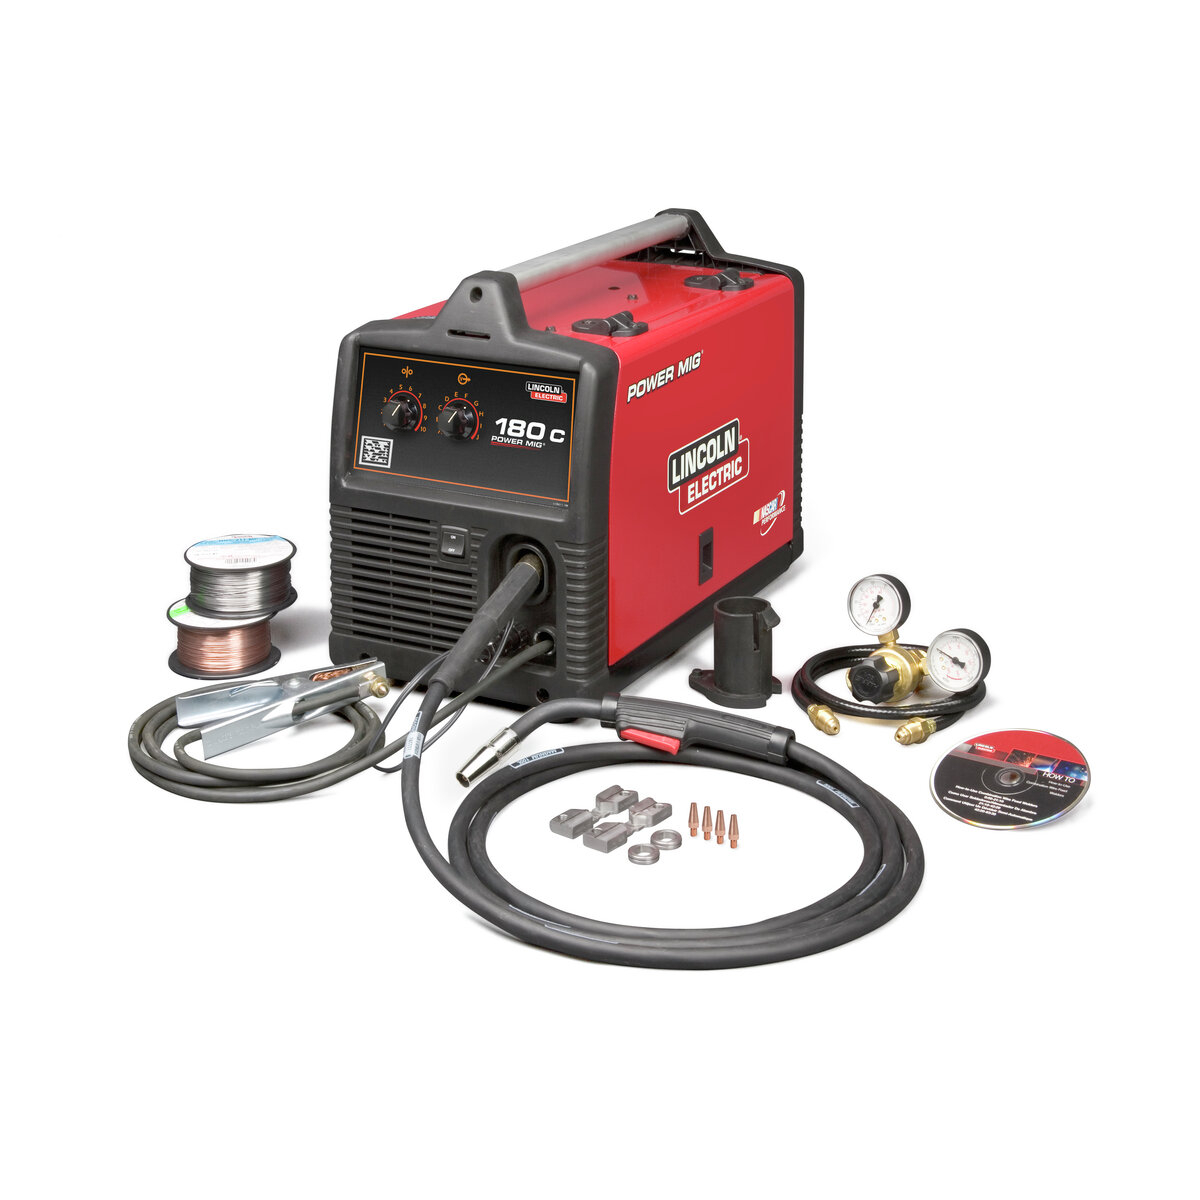 POWER MIG® 180C MIG welder is portable for wire welding on thicker material for autobody, farming, and repair.